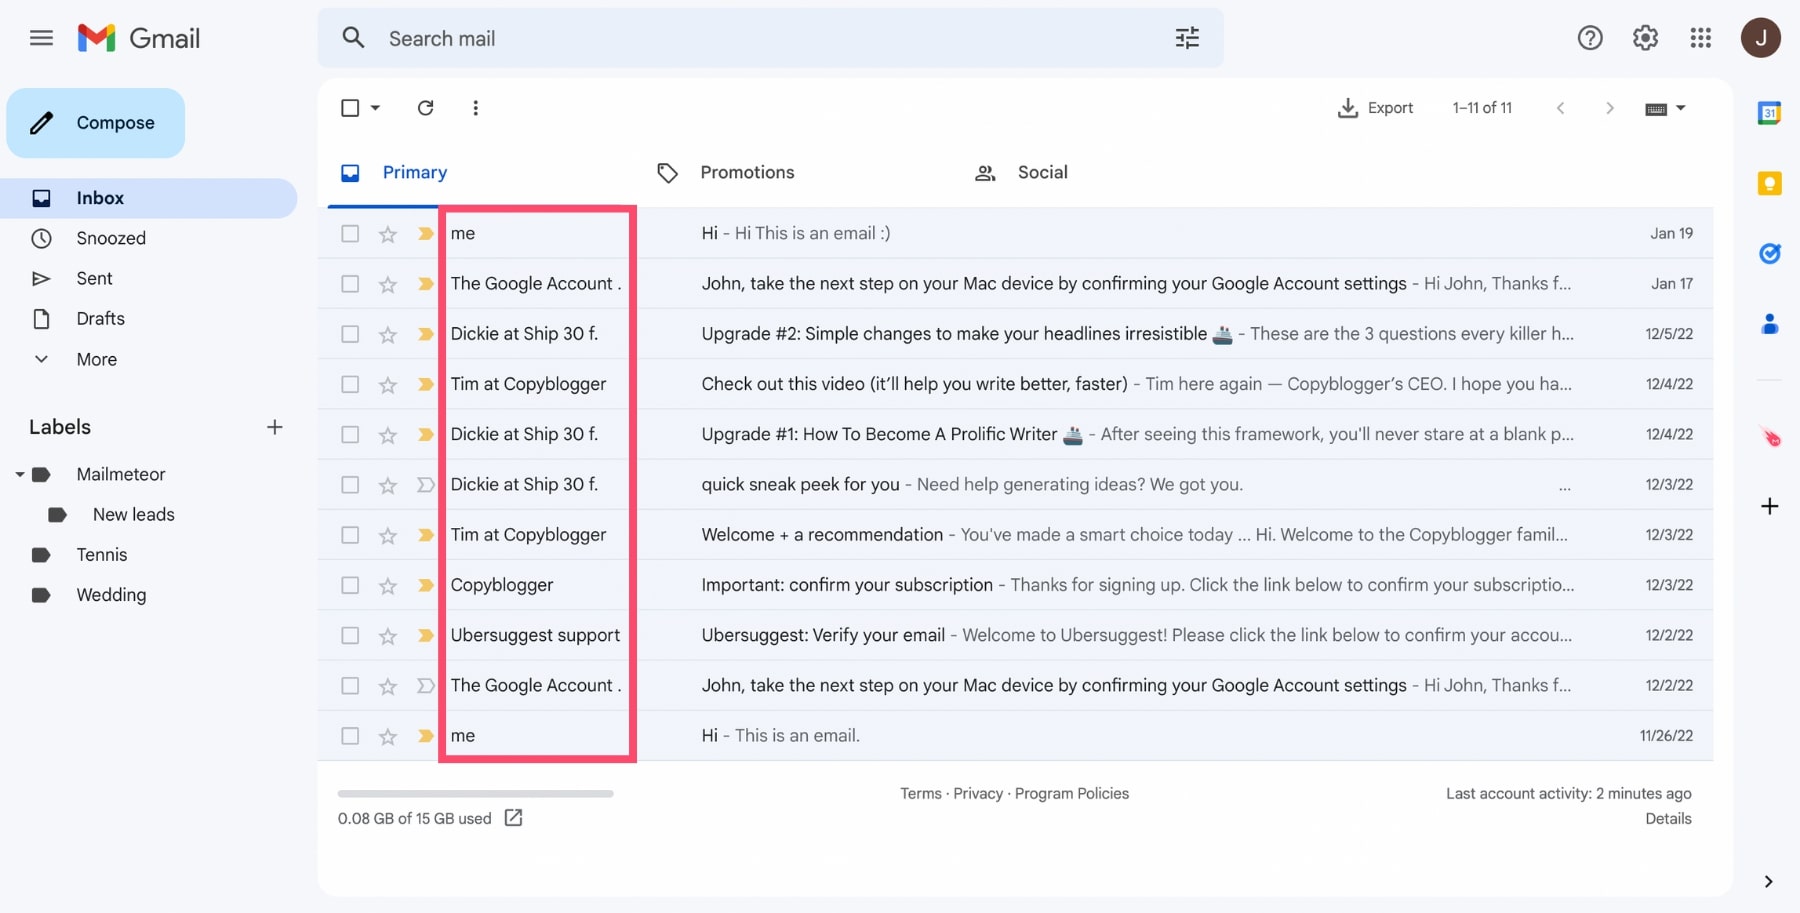 Email name in Gmail